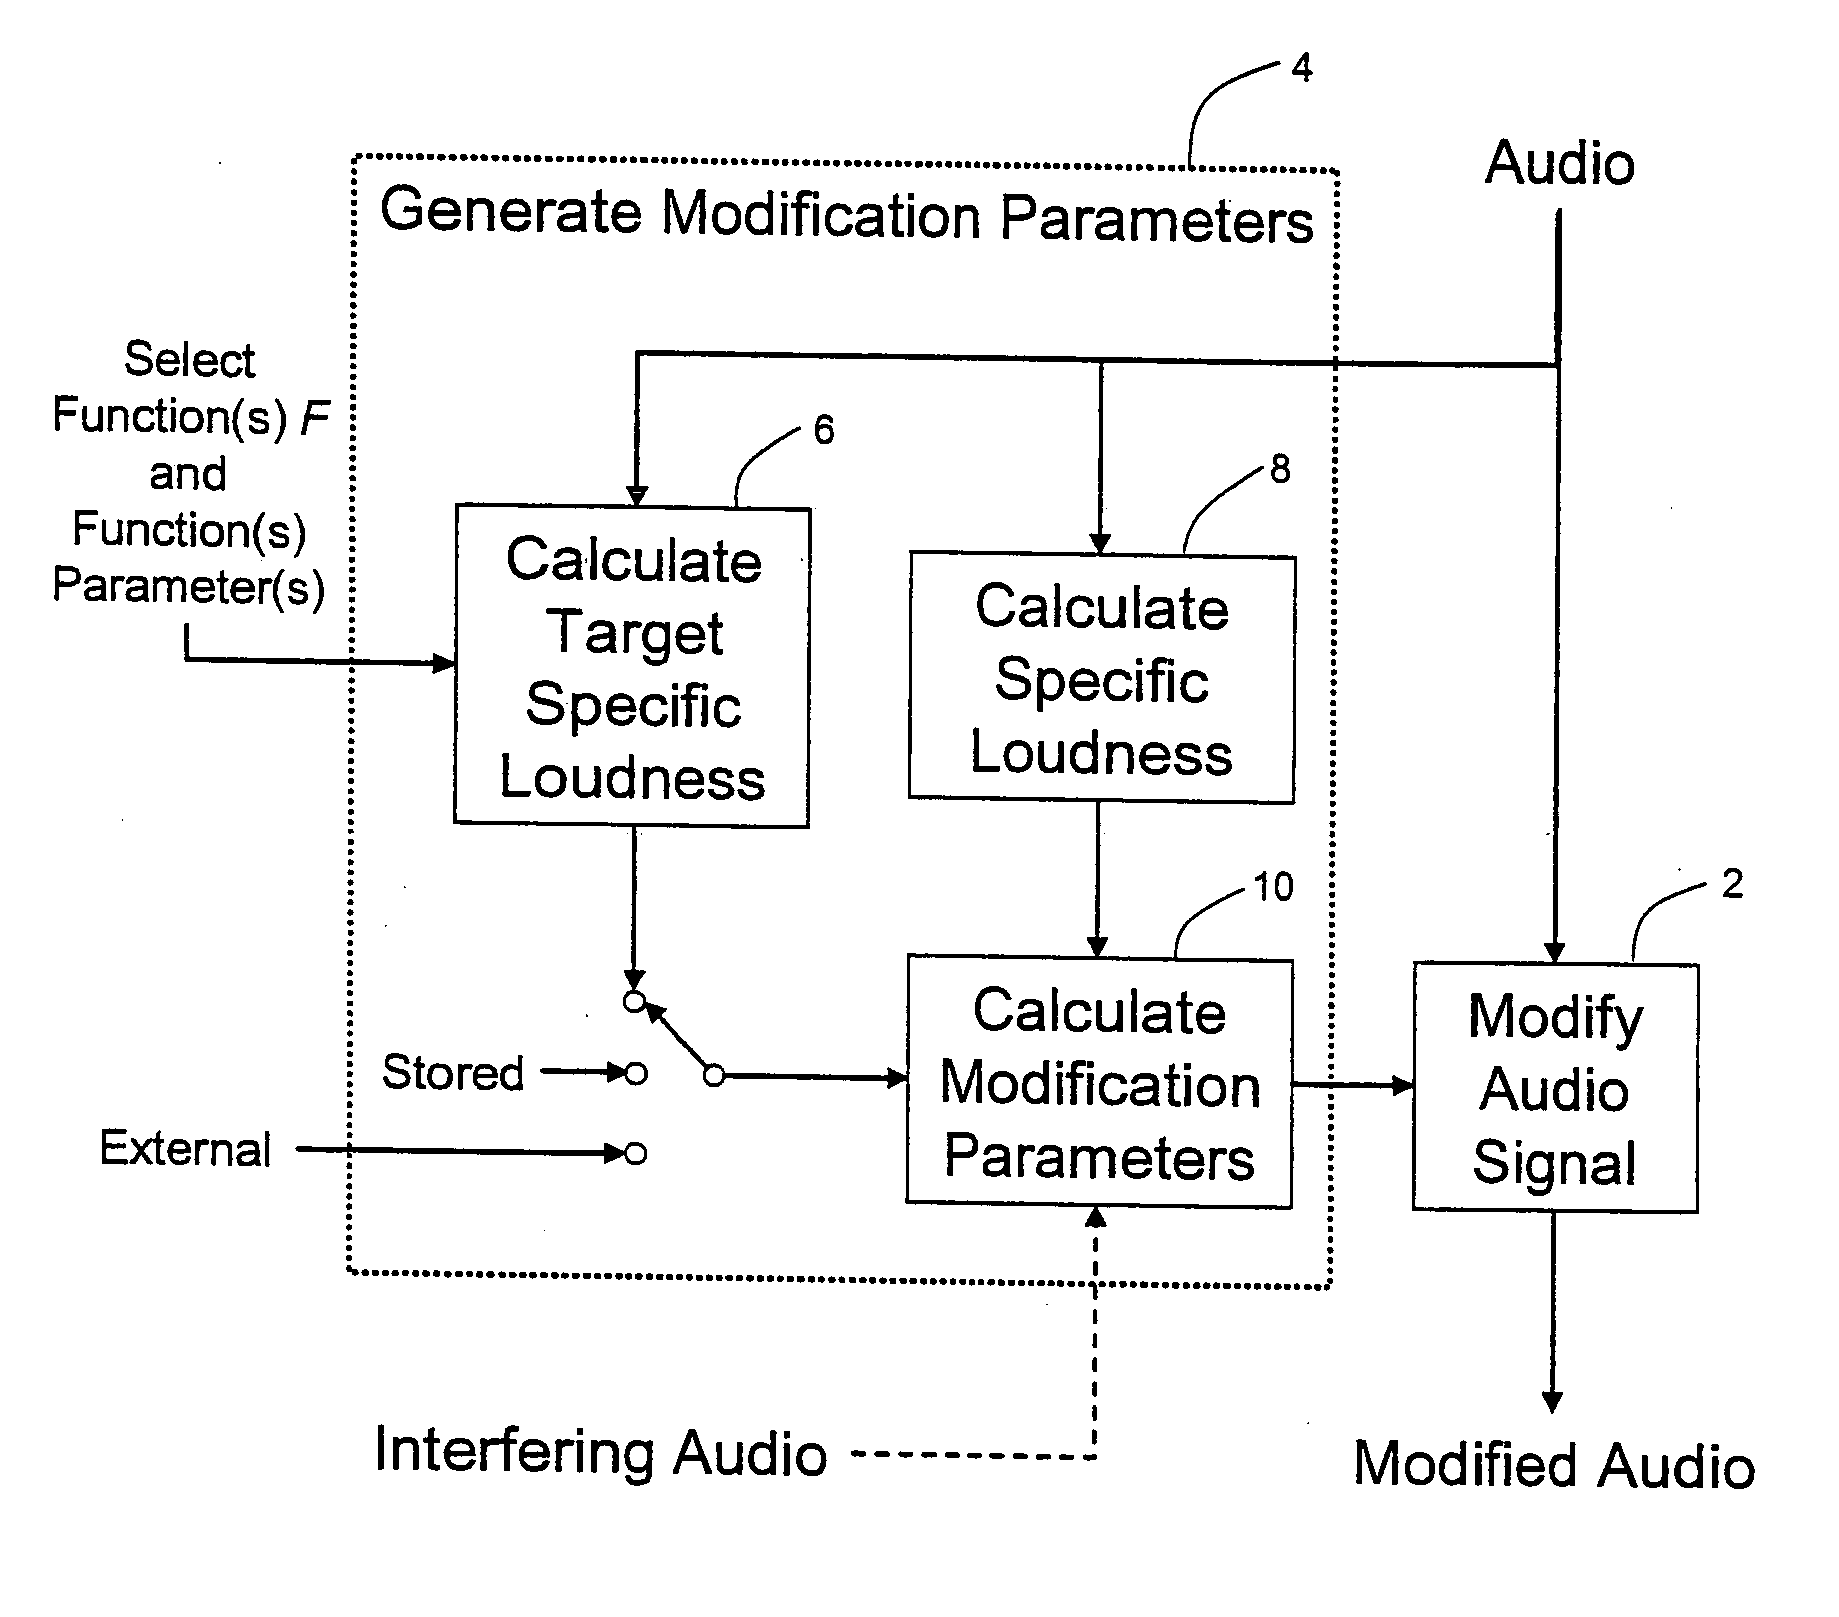 Calculating and adjusting the perceived loudness and/or the perceived spectral balance of an audio signal